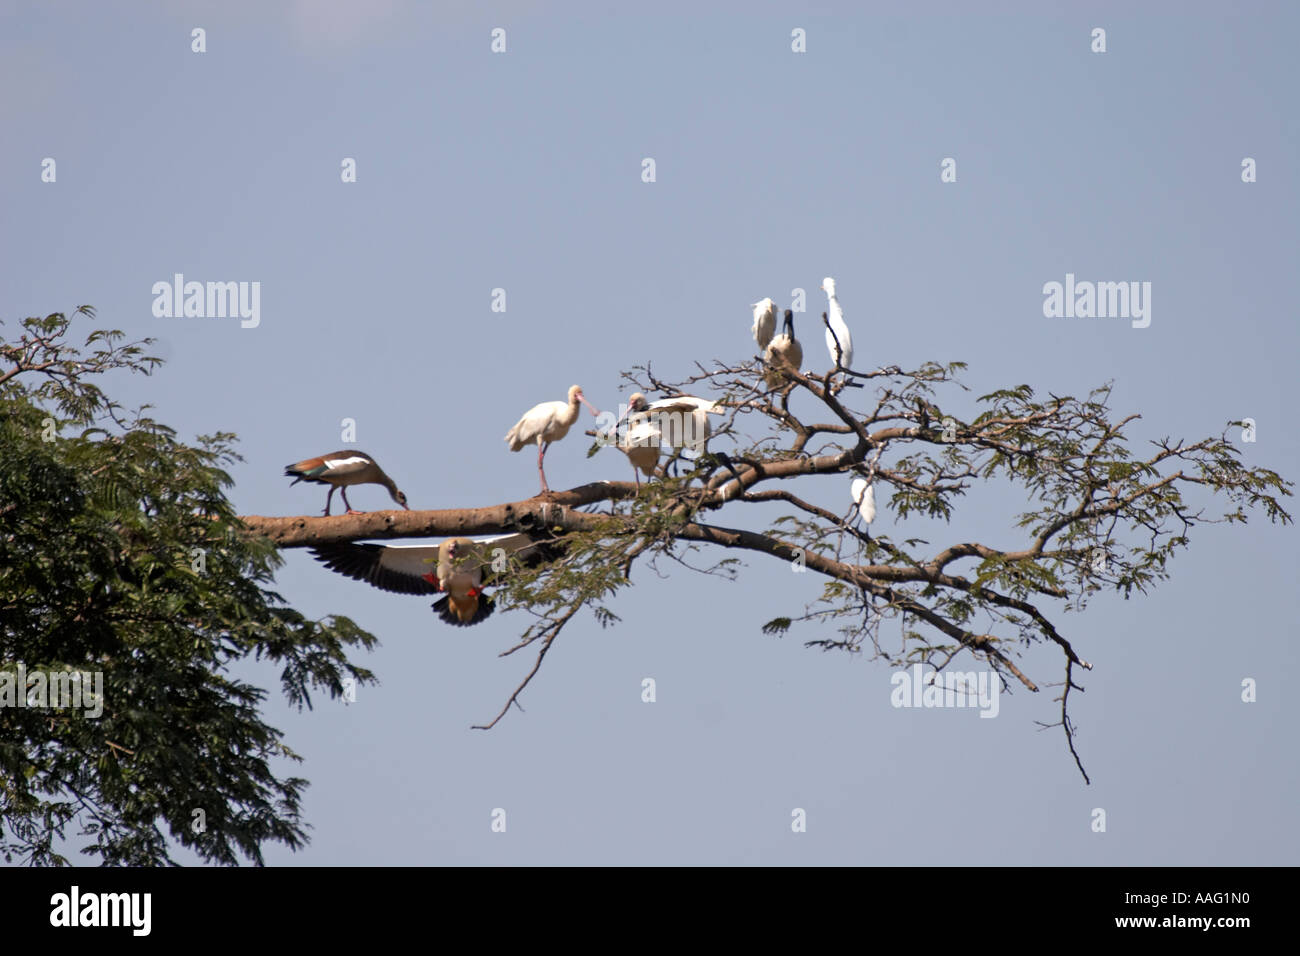 Egyptian goose flying up with Spoonbill Sacred ibis and Cattle egrets in a tree near Kuch Ethiopia Africa Stock Photo